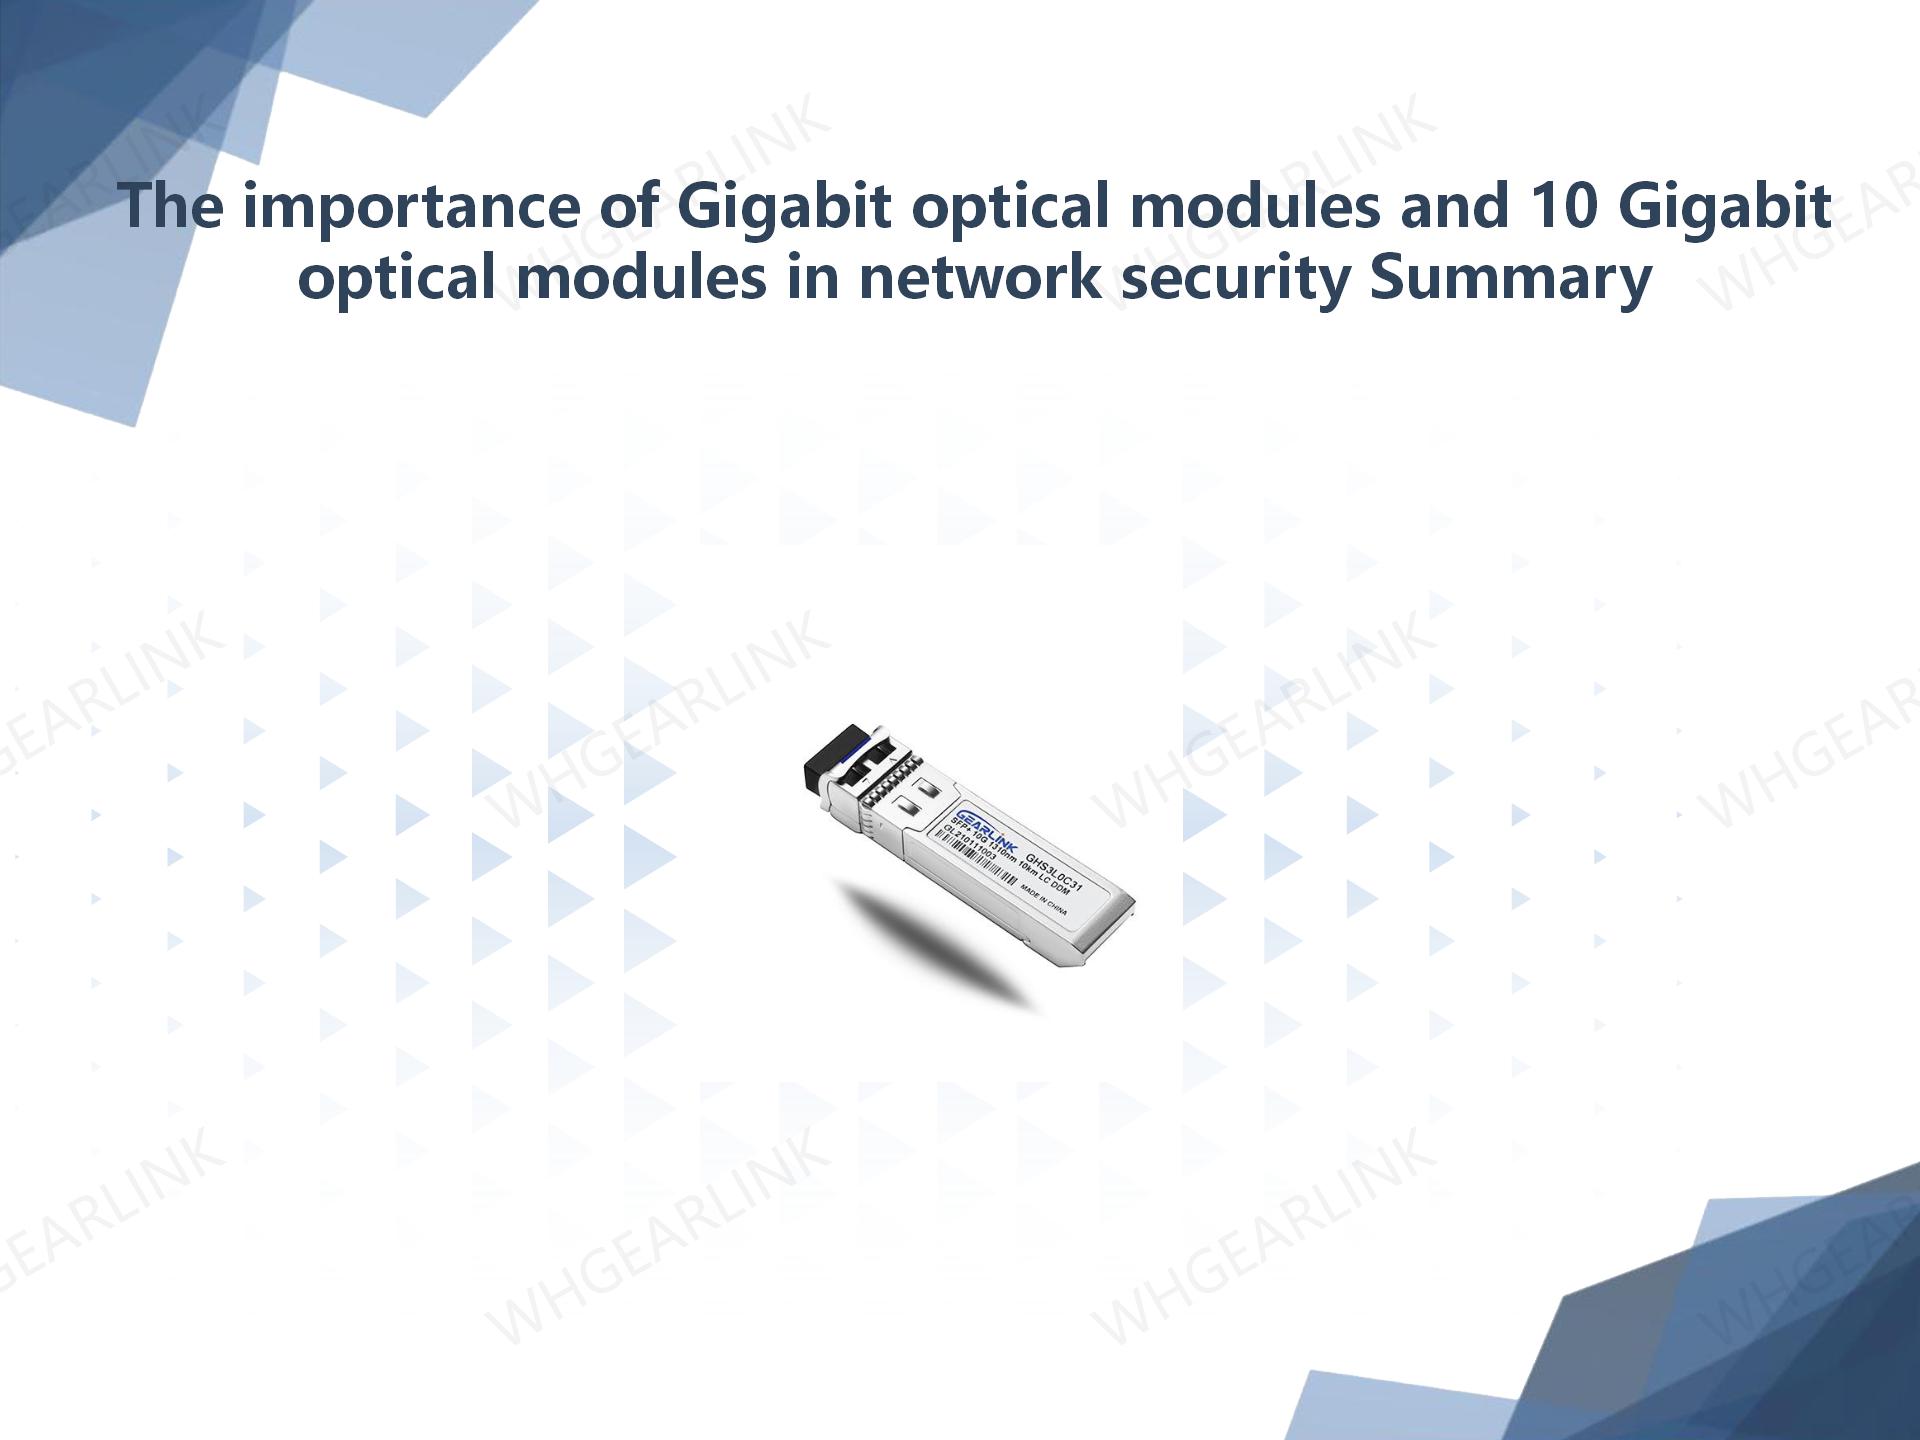 The importance of Gigabit optical modules and 10 Gigabit optical modules in network security